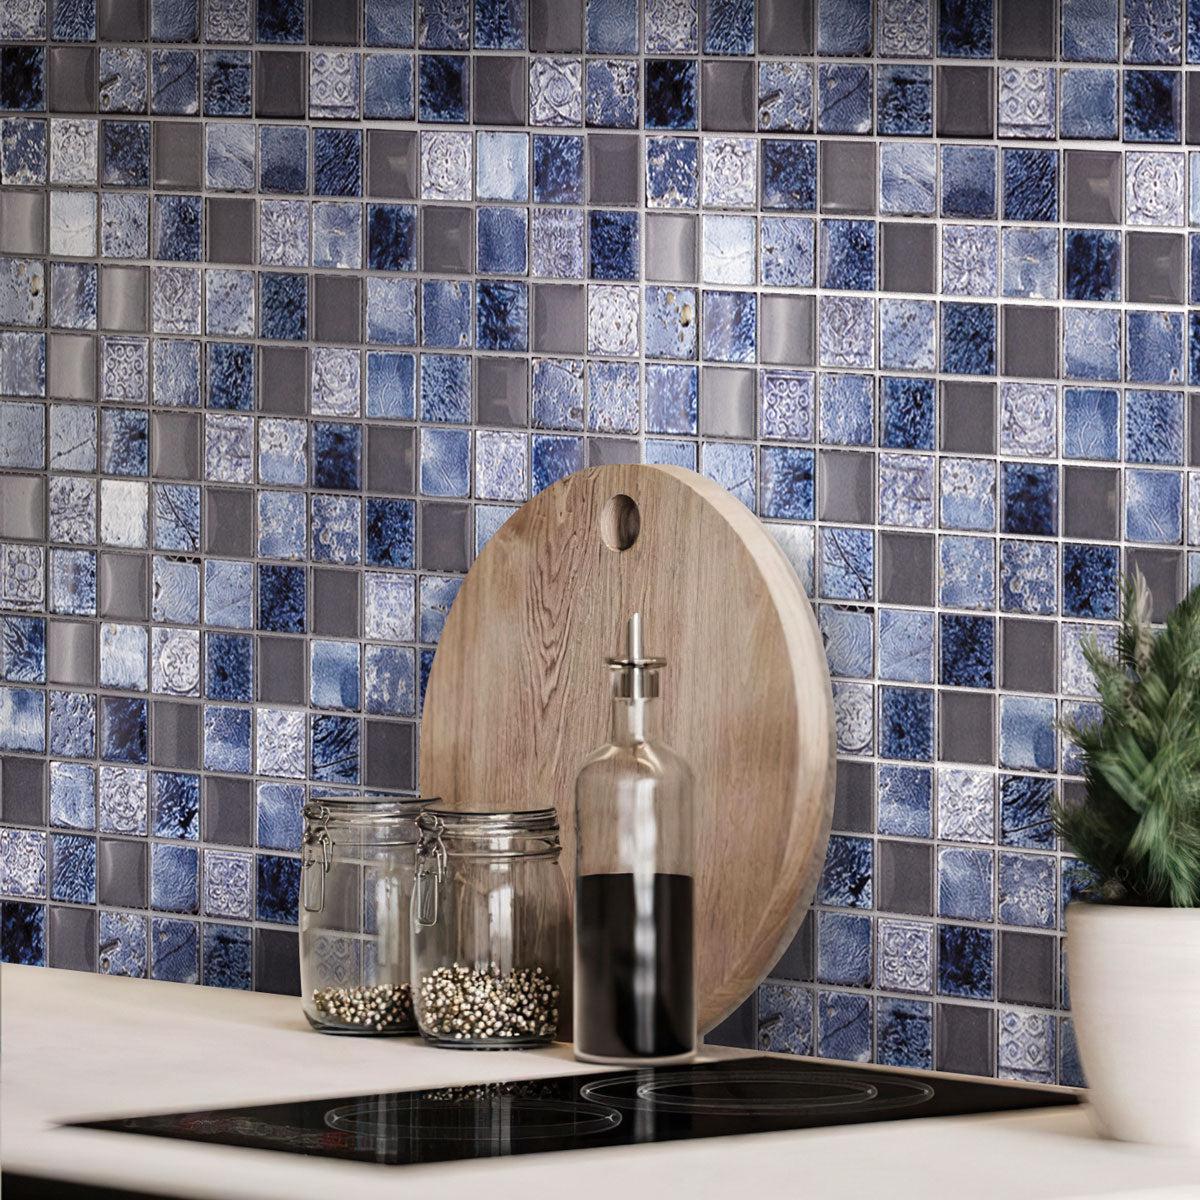 Blue and Gray glass, resin, and stone square backsplash tile